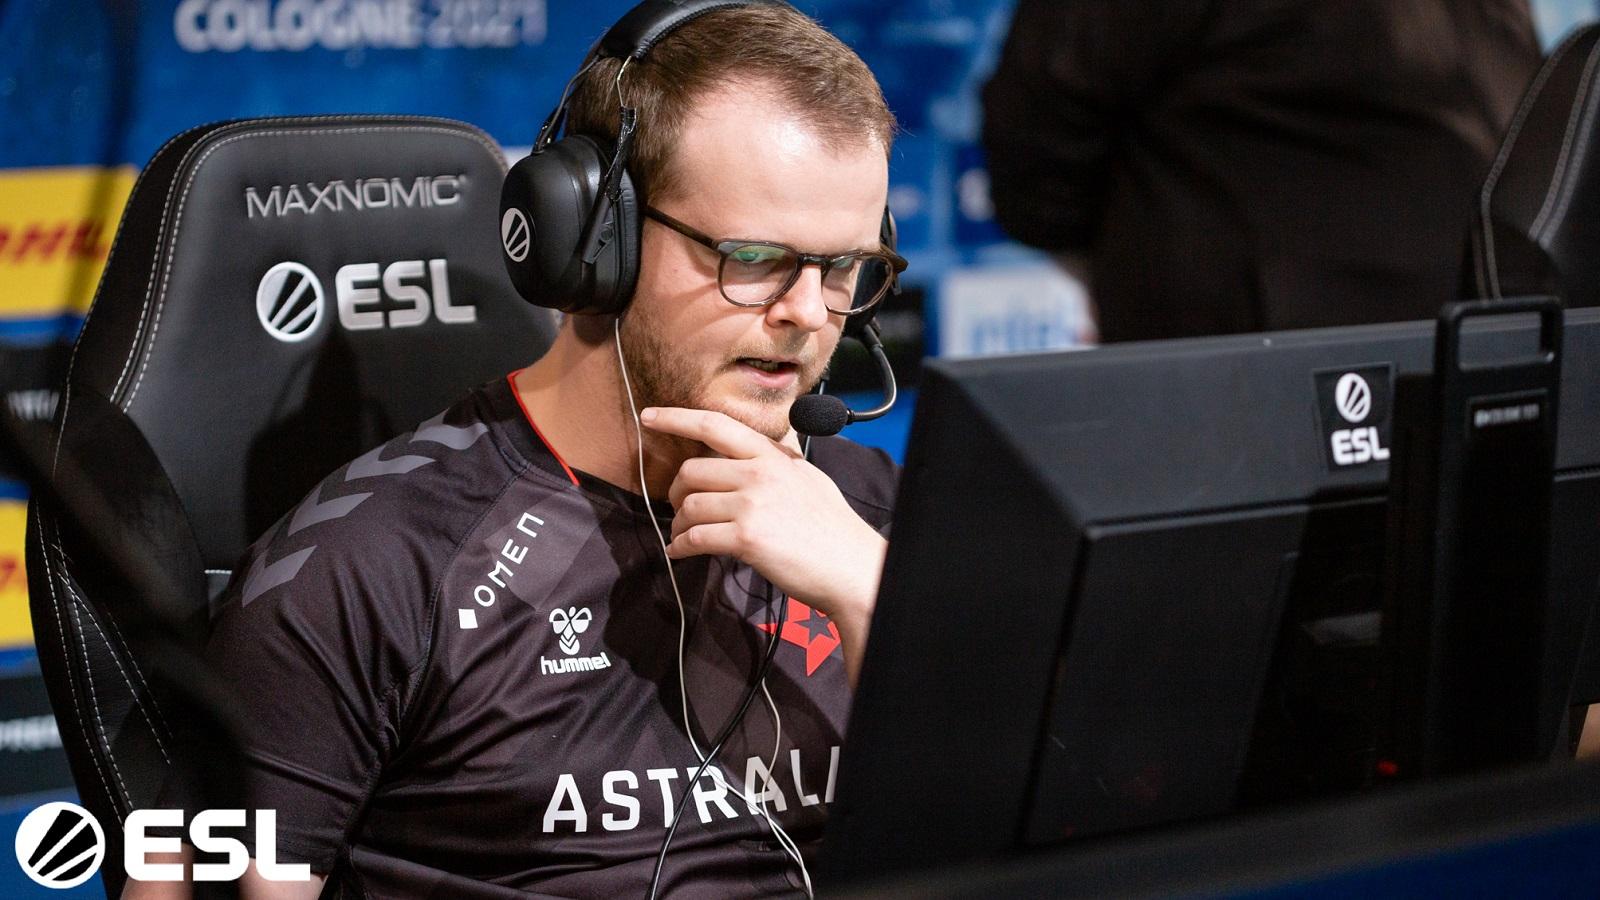 Xyp9x at IEM Cologne 2021